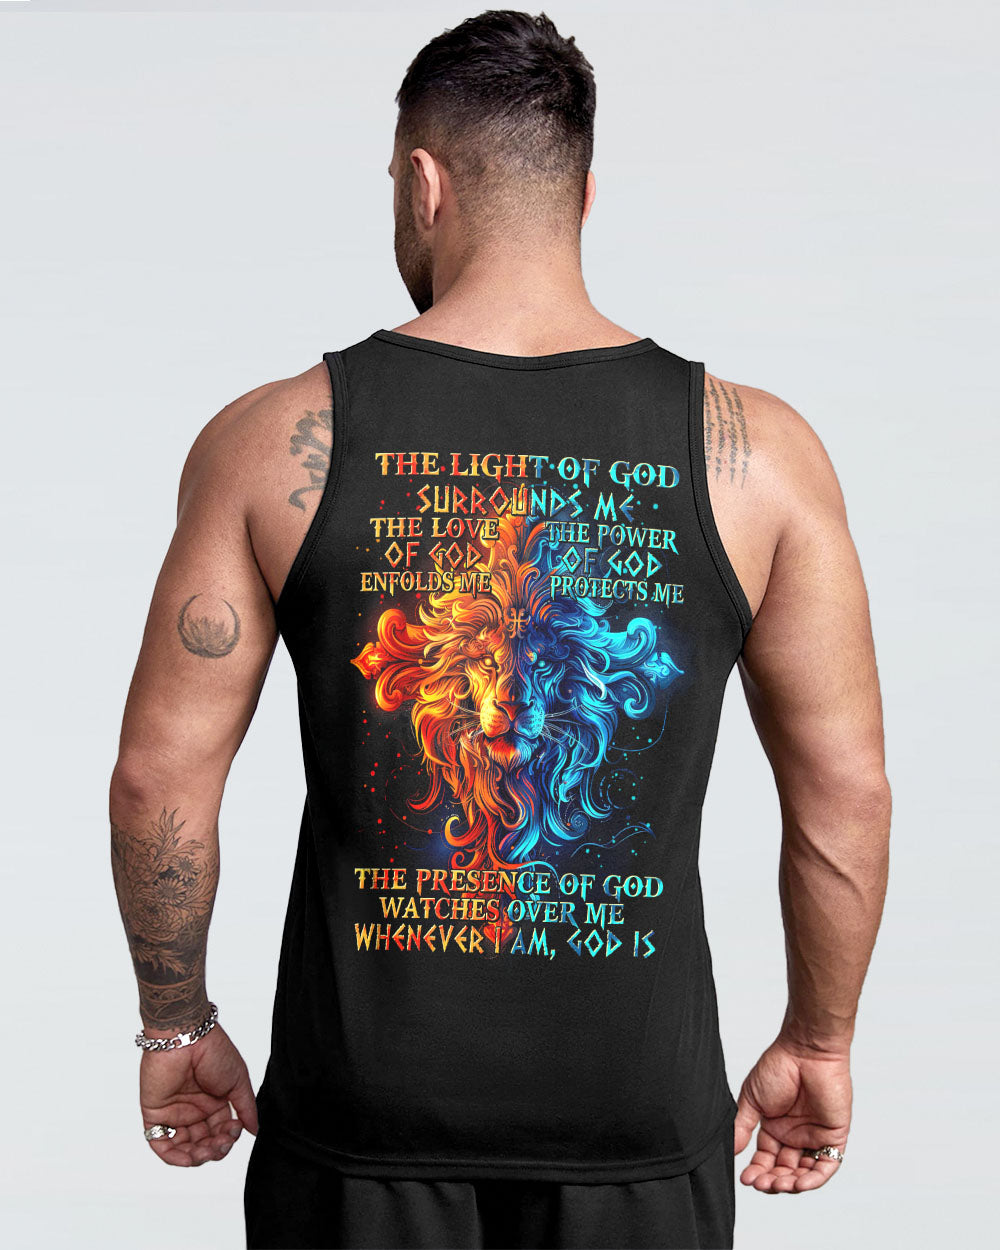 The Power Of God Protects Me Men's All Over Print Shirt - Tytm2404242